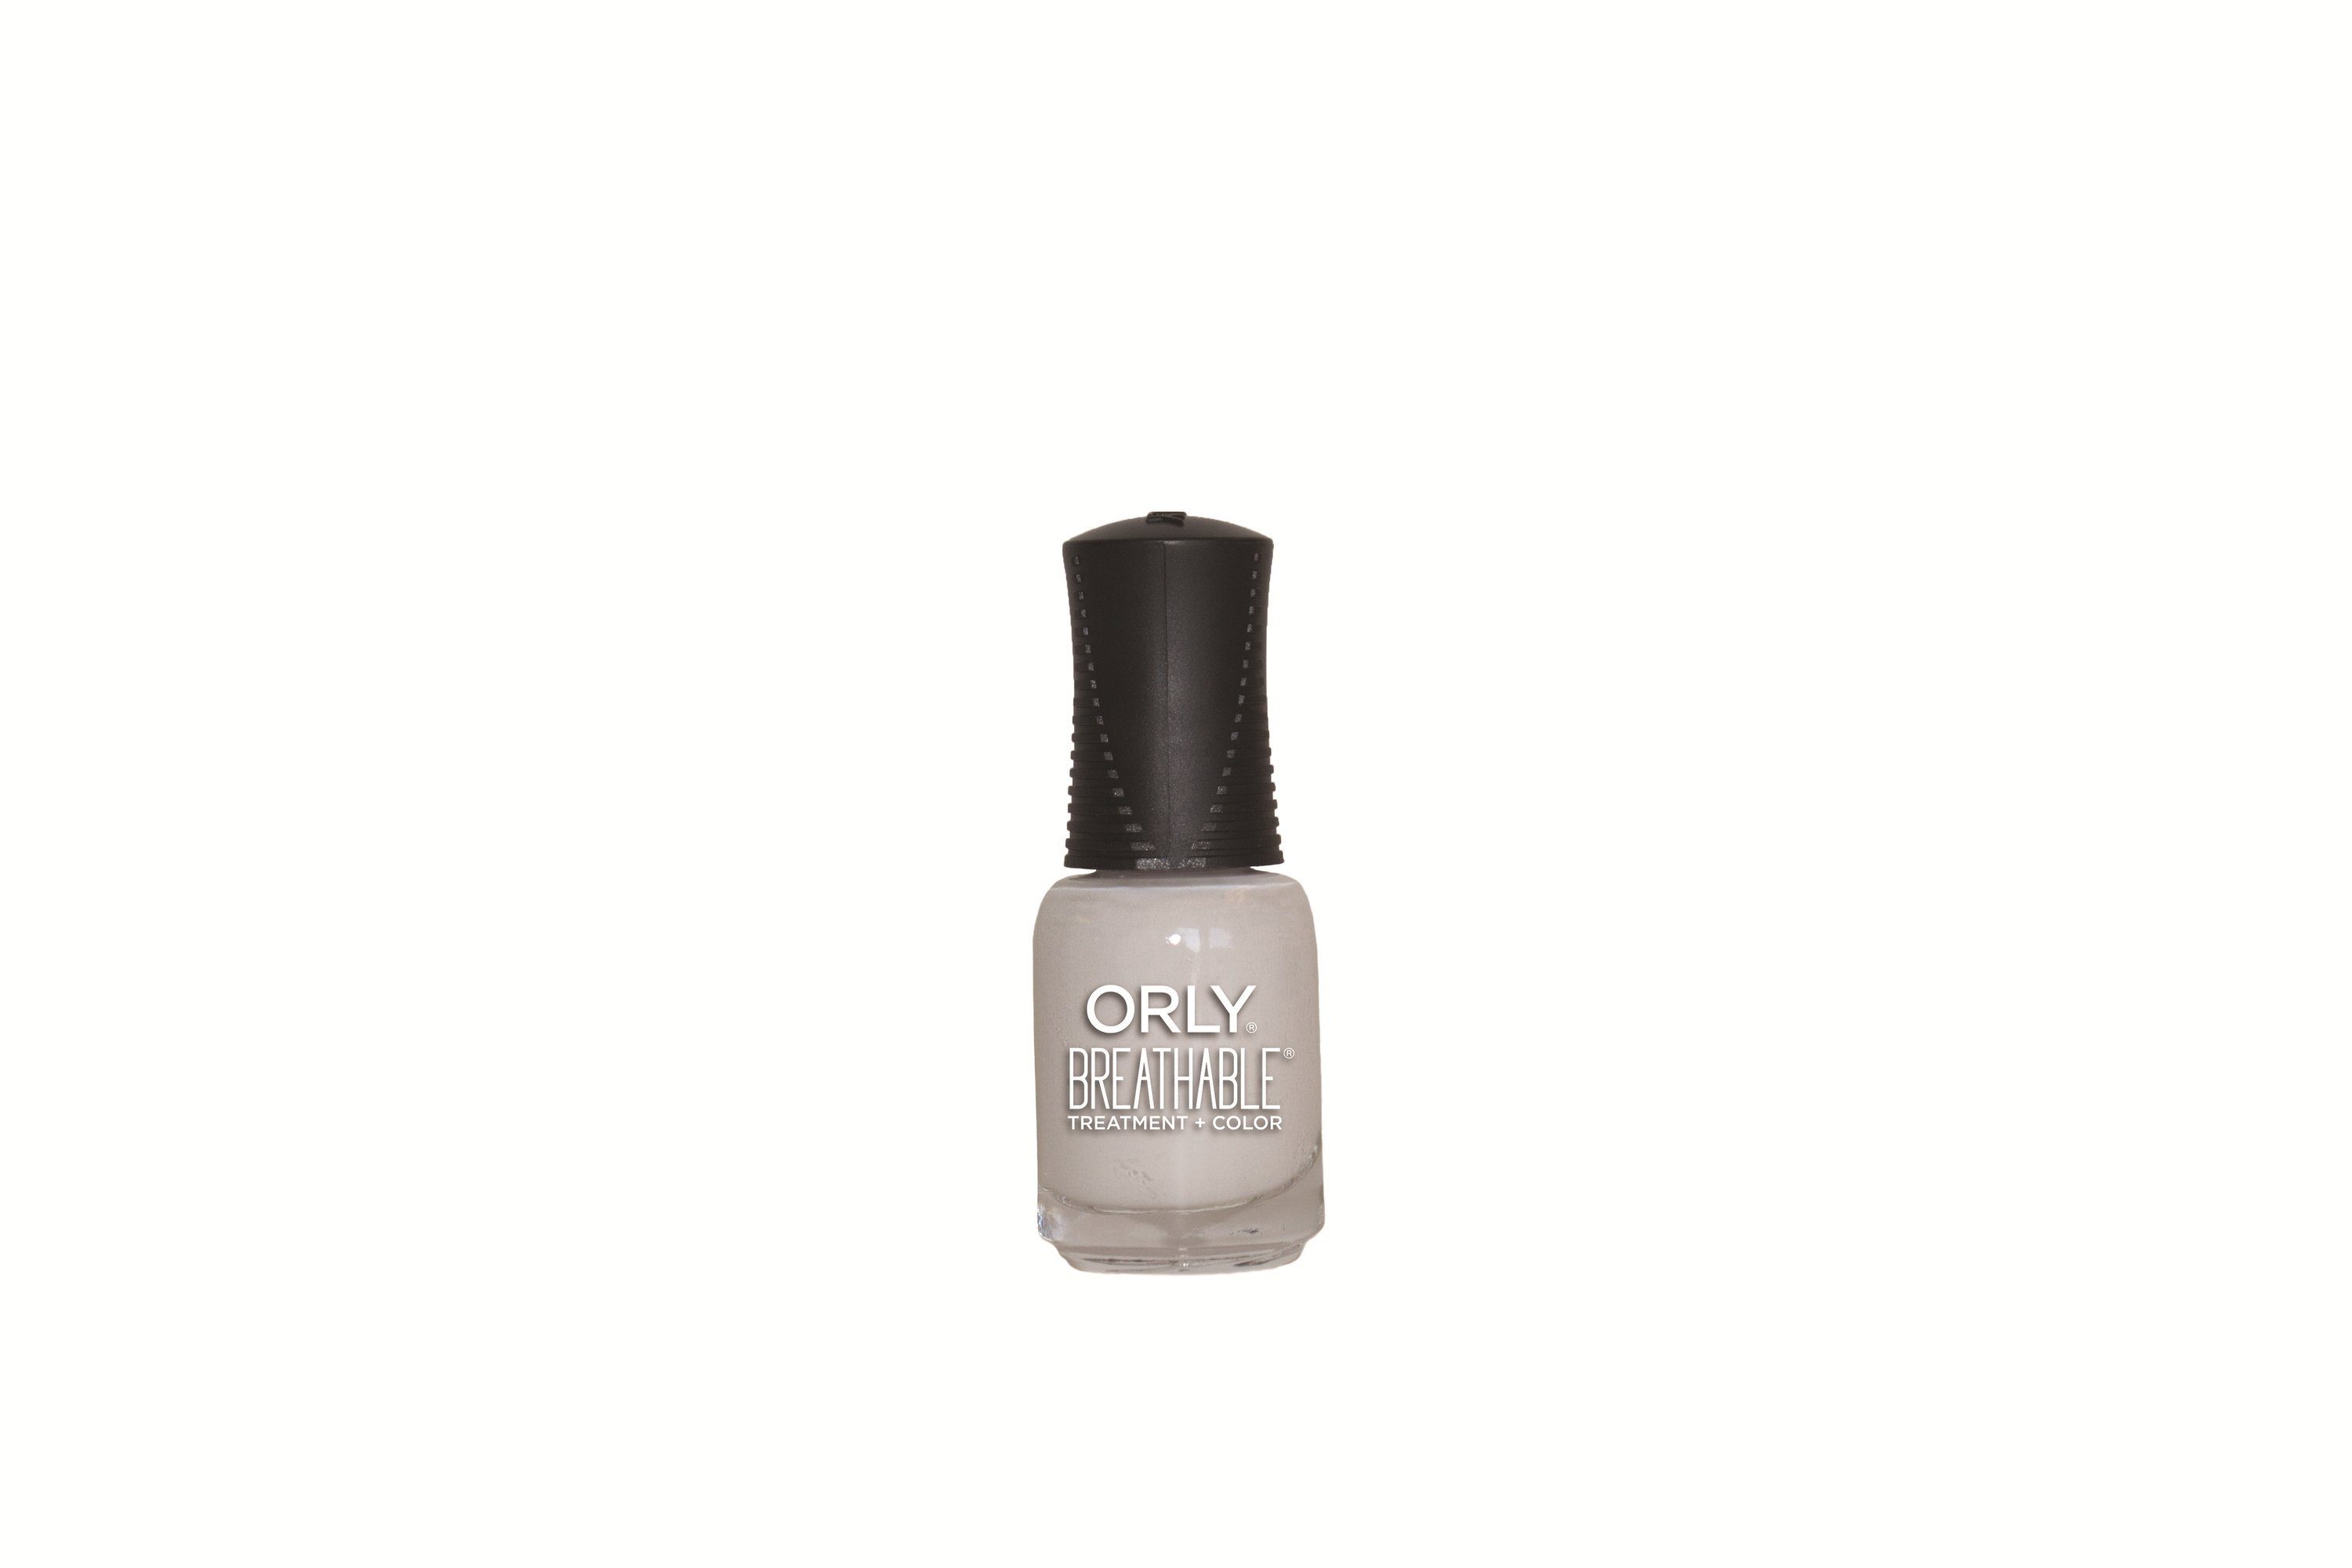 Breathable ML Orly - Barely Mini ORLY Nagellack There, 5,3